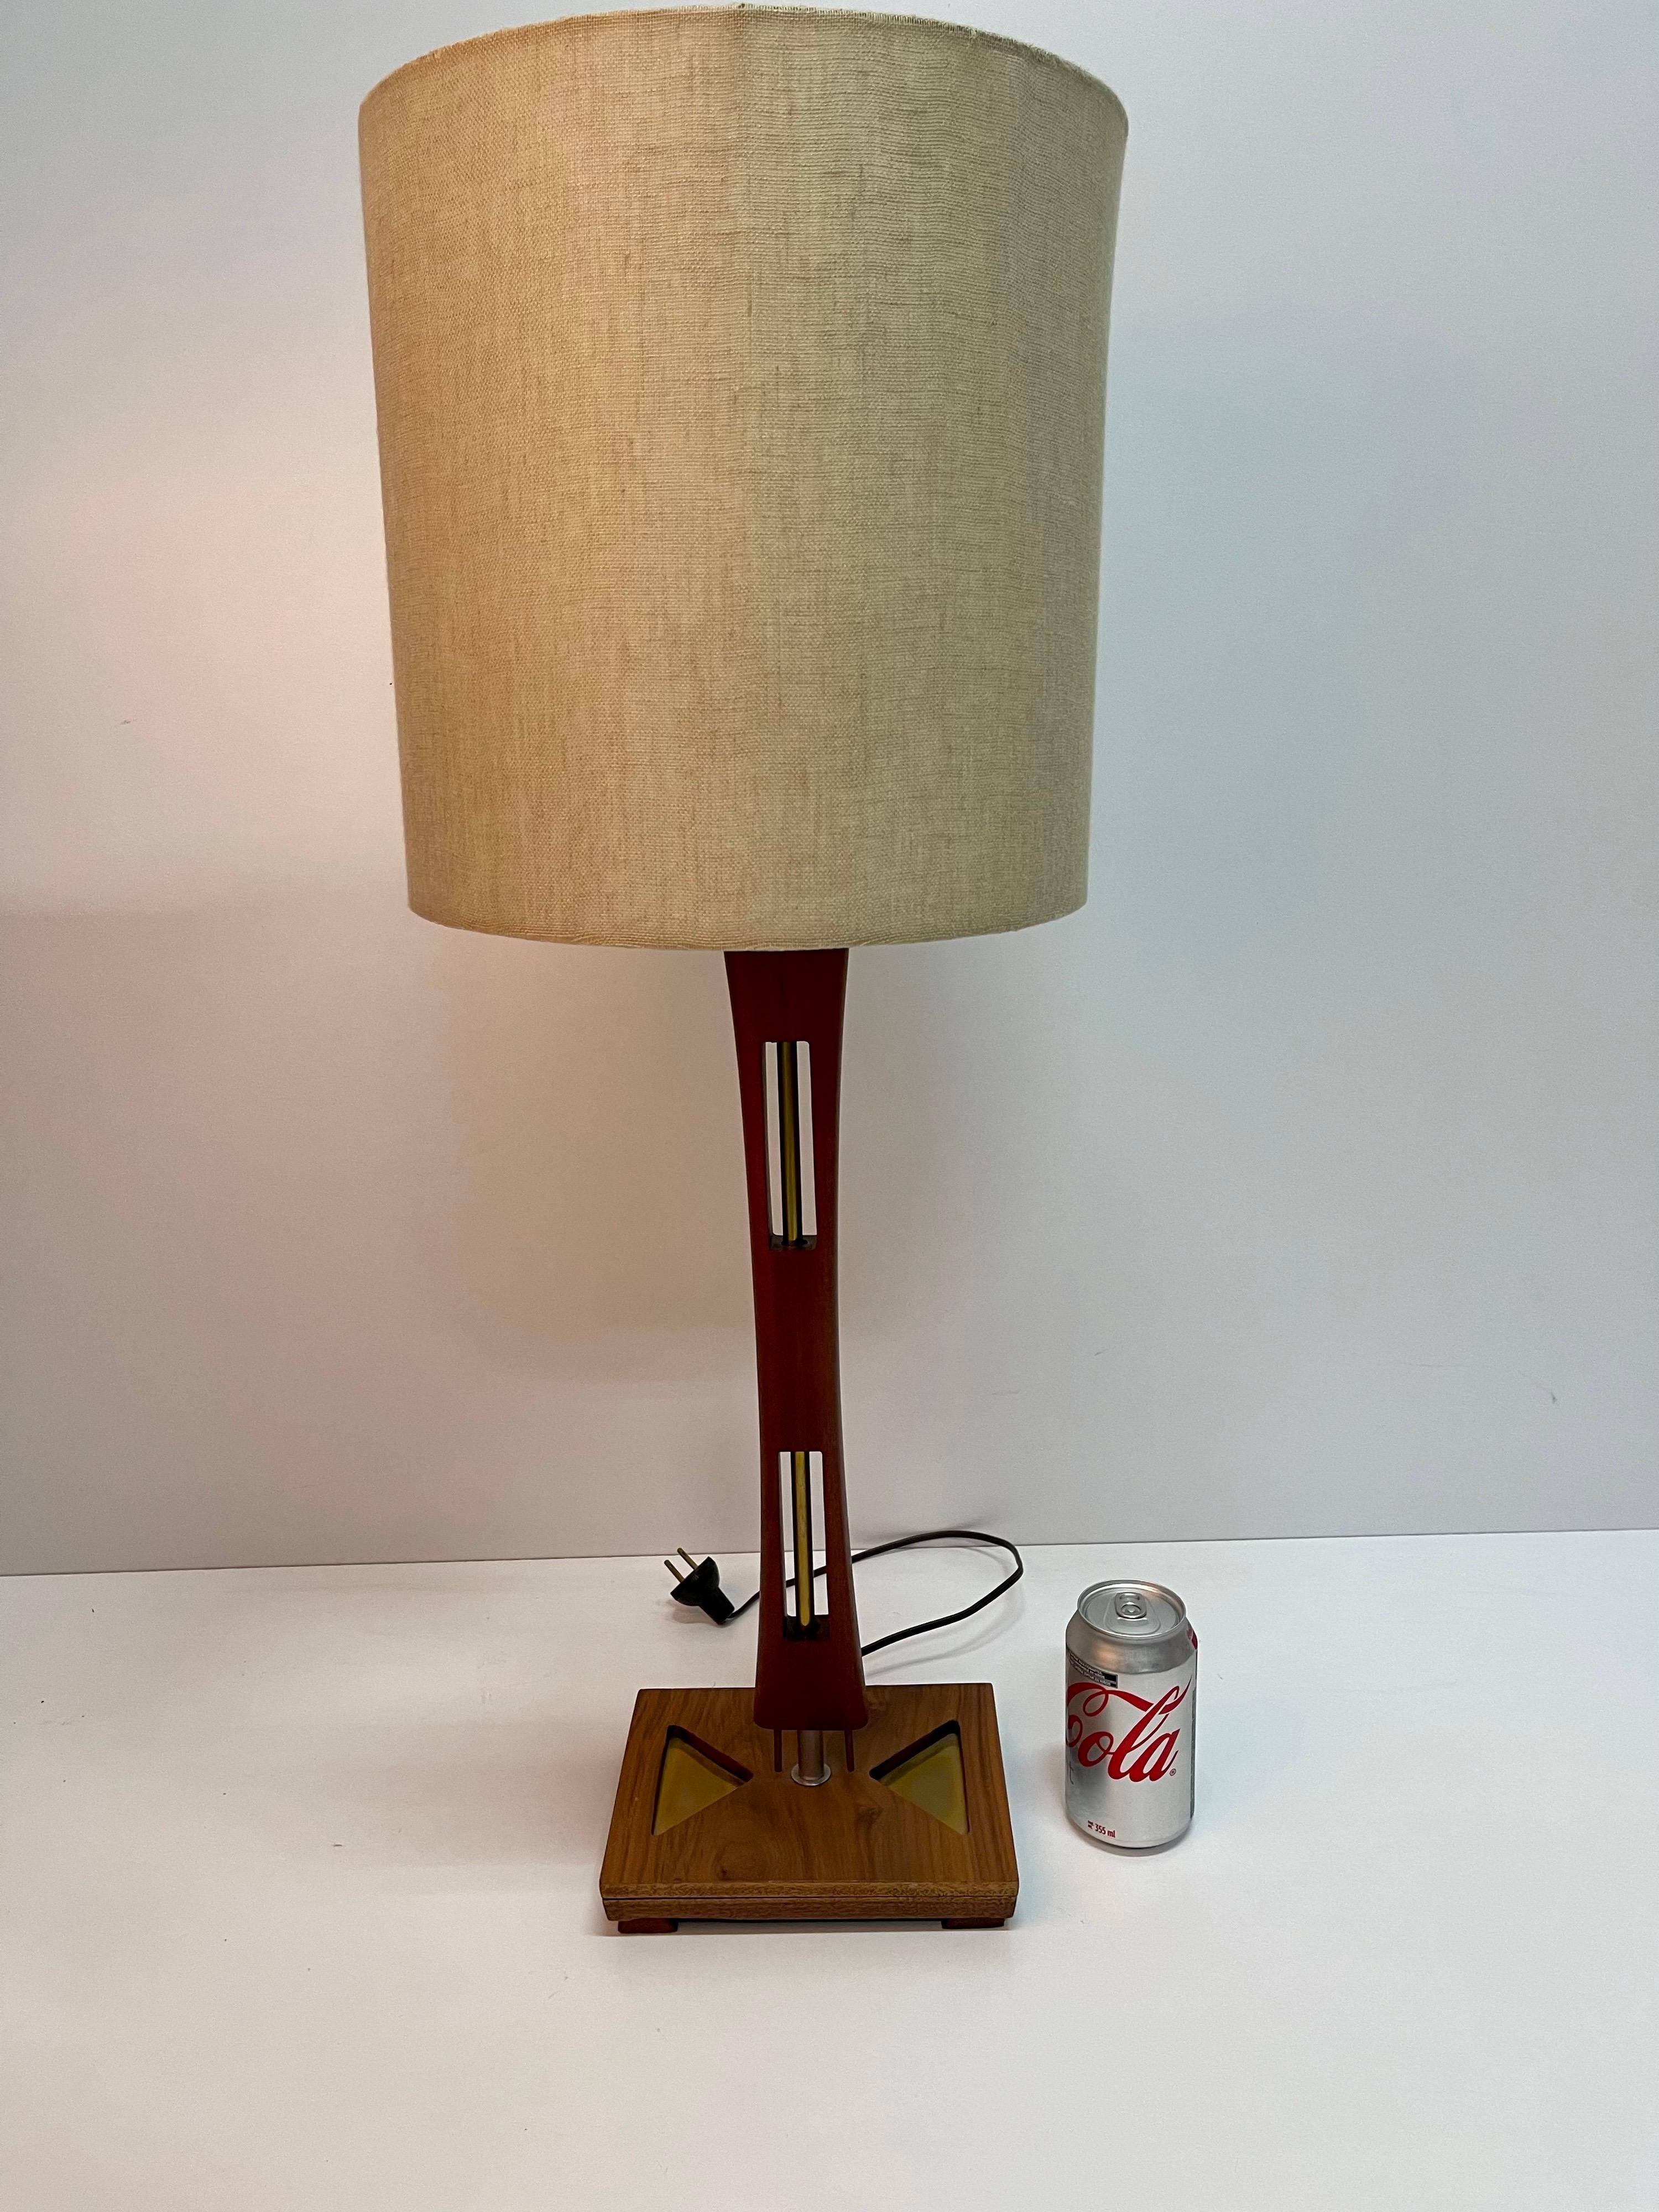 For your consideration and as part of Mexican modernism, a lamp that combines three materials, walnut, mahogany and brass, an exquisite design and ready to set the mood for a Mid-Century Modern space.

Shade in not included.